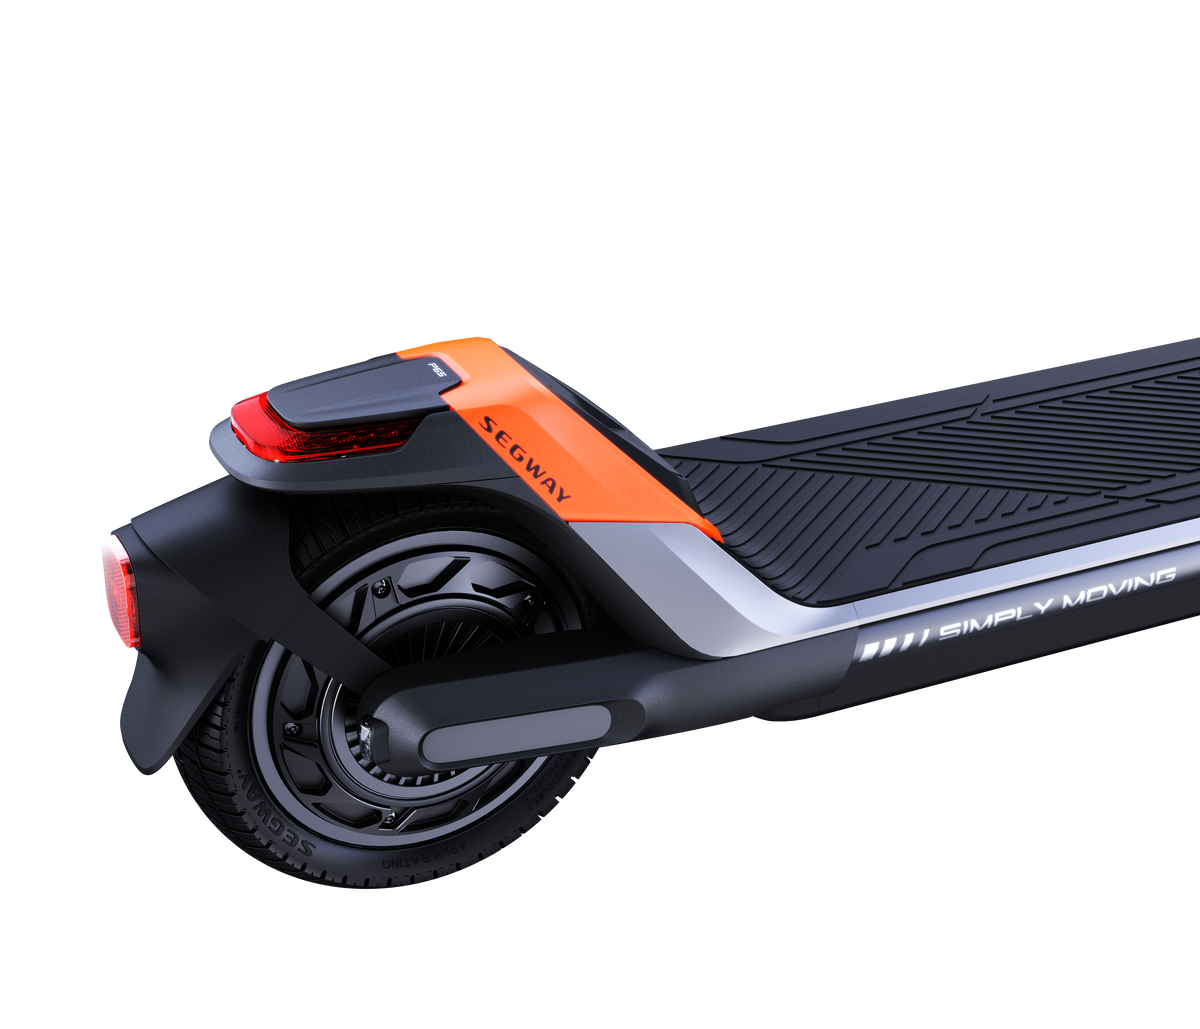 Segway KickScooter P65 Ninebot Scooter in Black